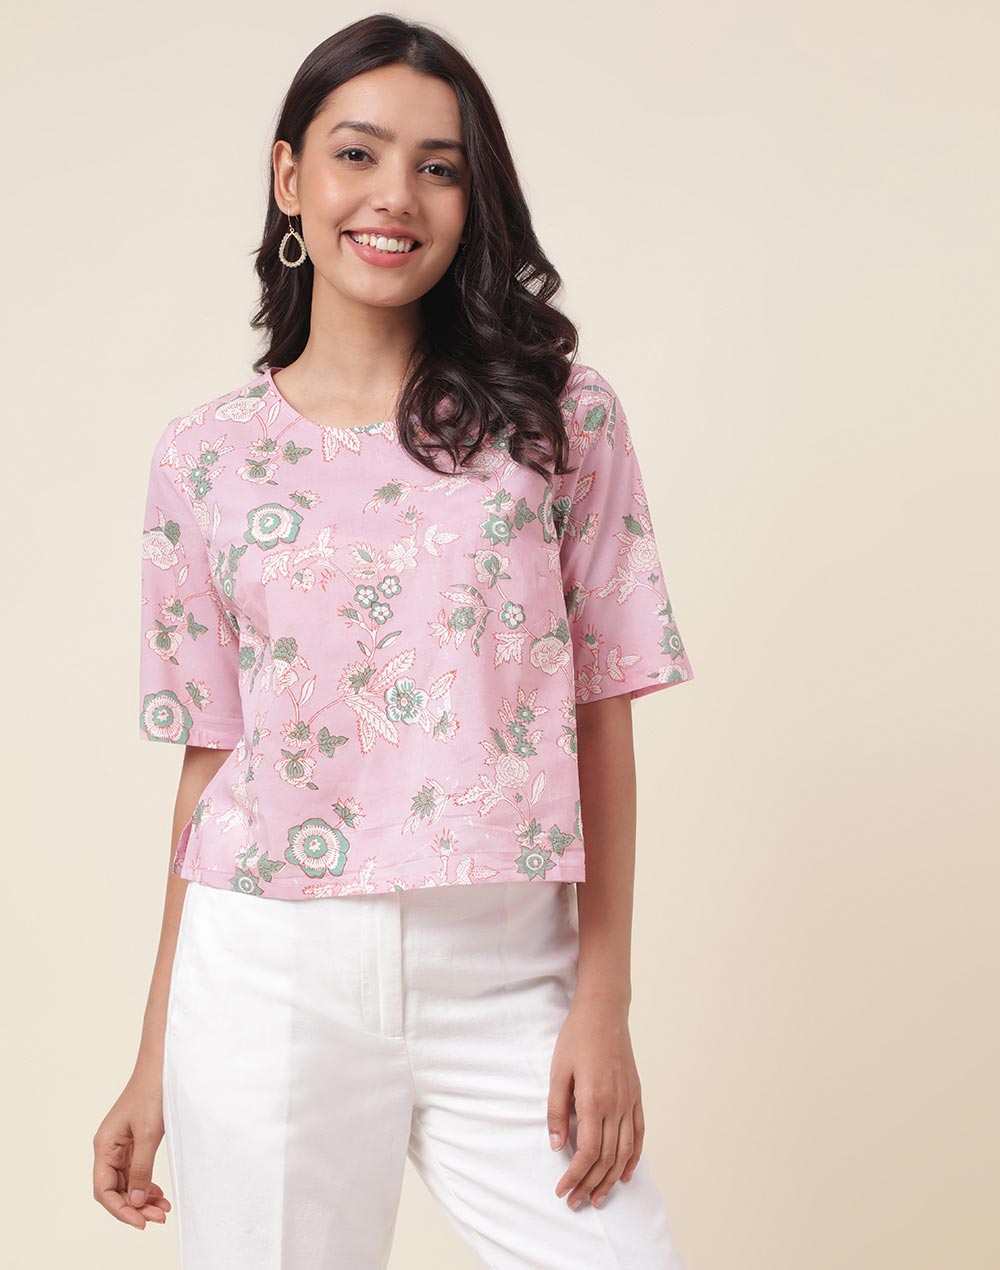 Buy Pink Cotton Hand Block Printed Short Top for Women Online at ...